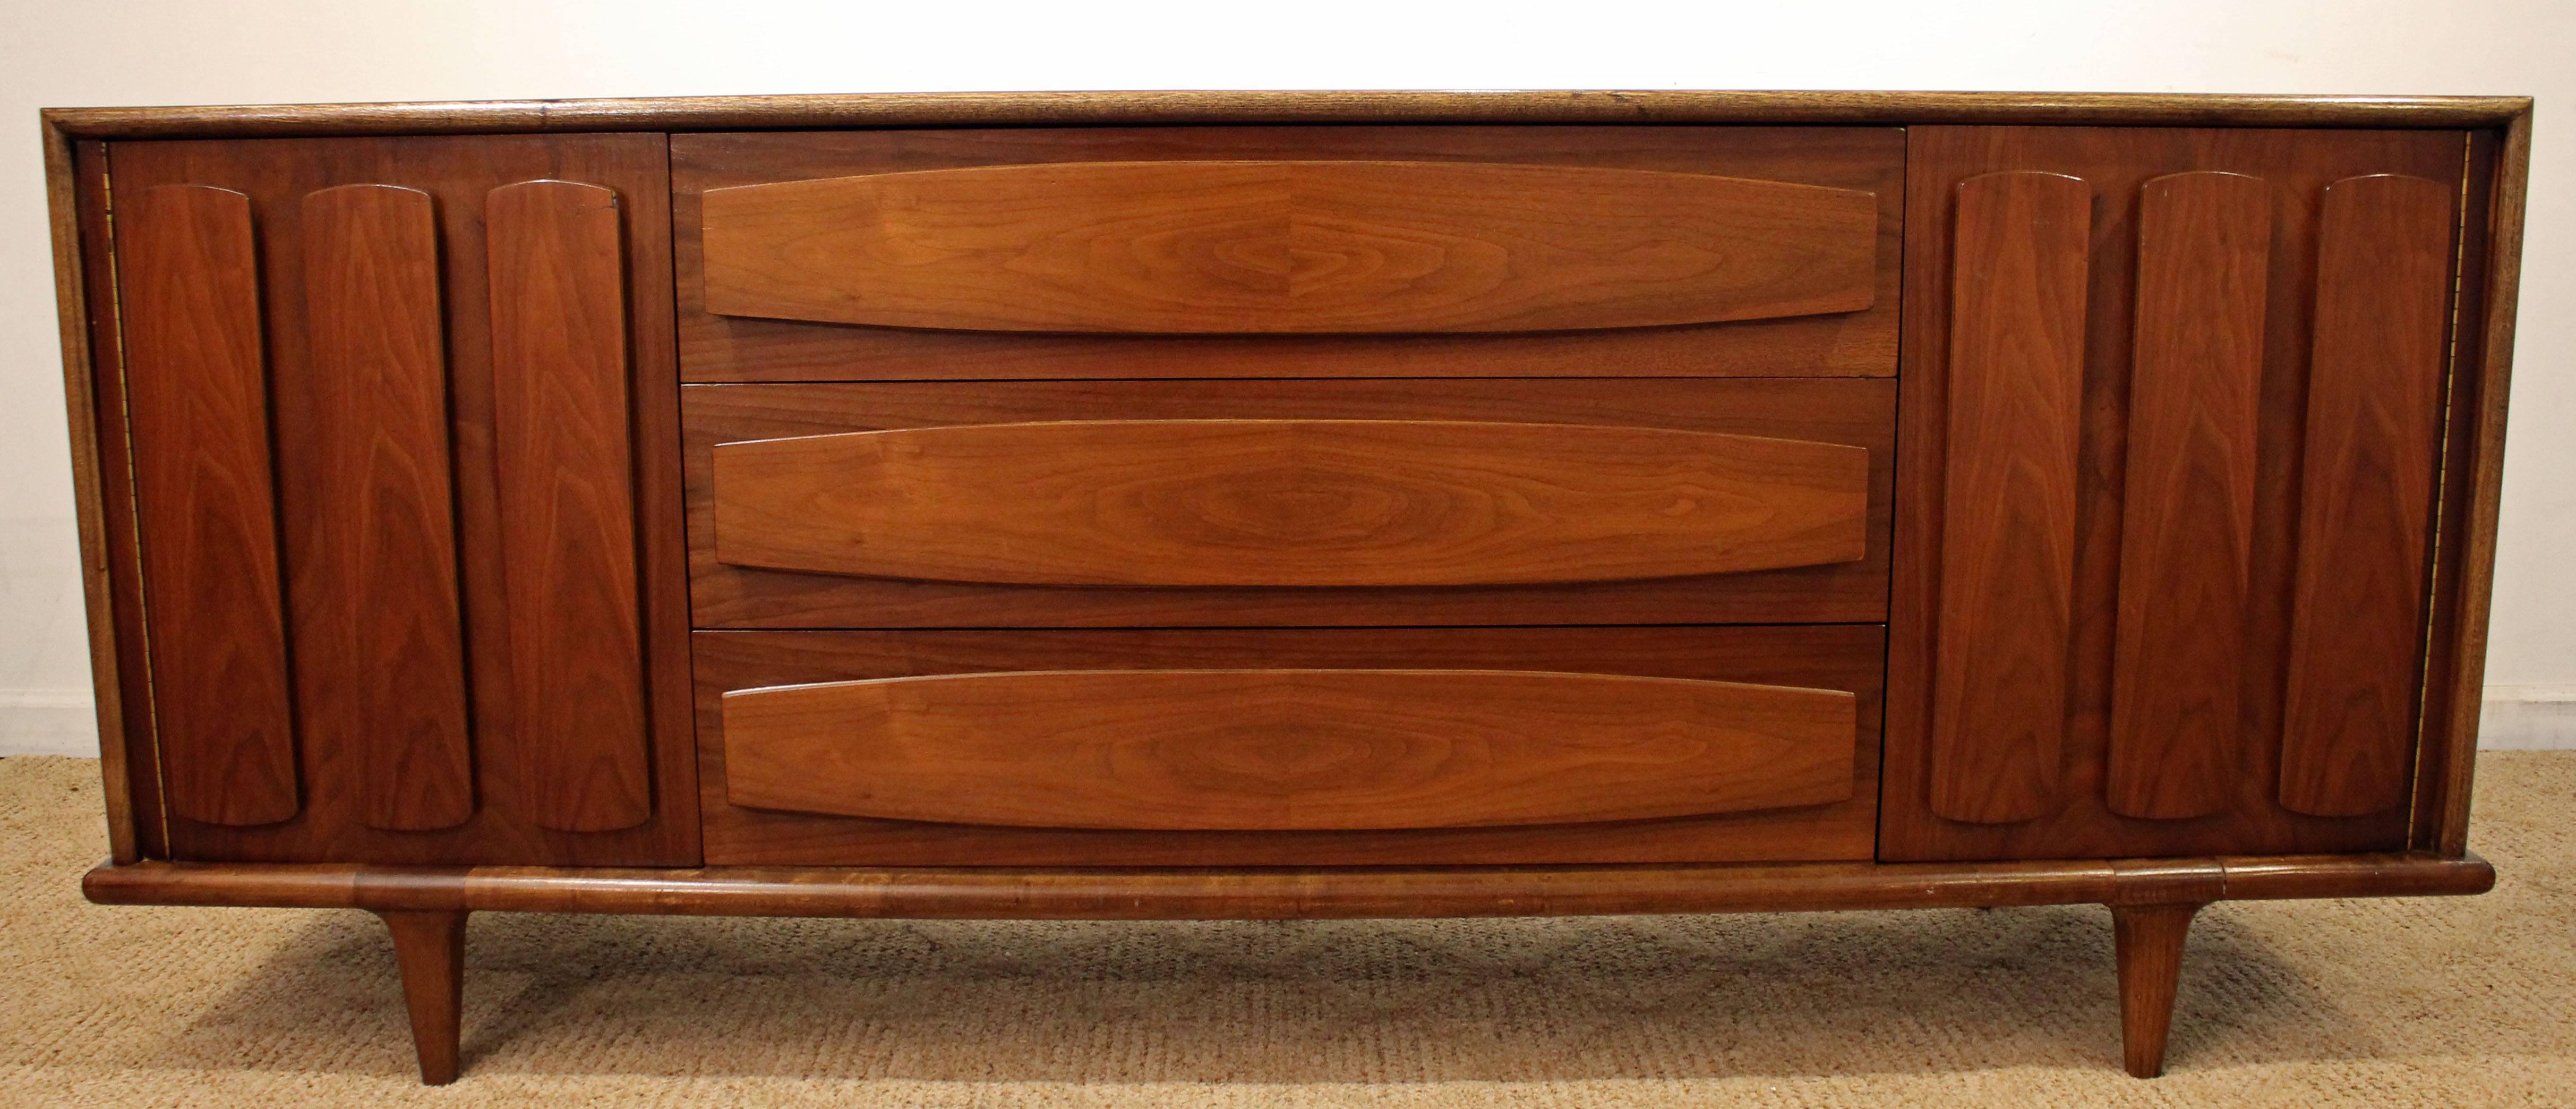 This piece is made of walnut with two doors on each side and nine dovetailed drawers. It is signed by American of Martinsville.